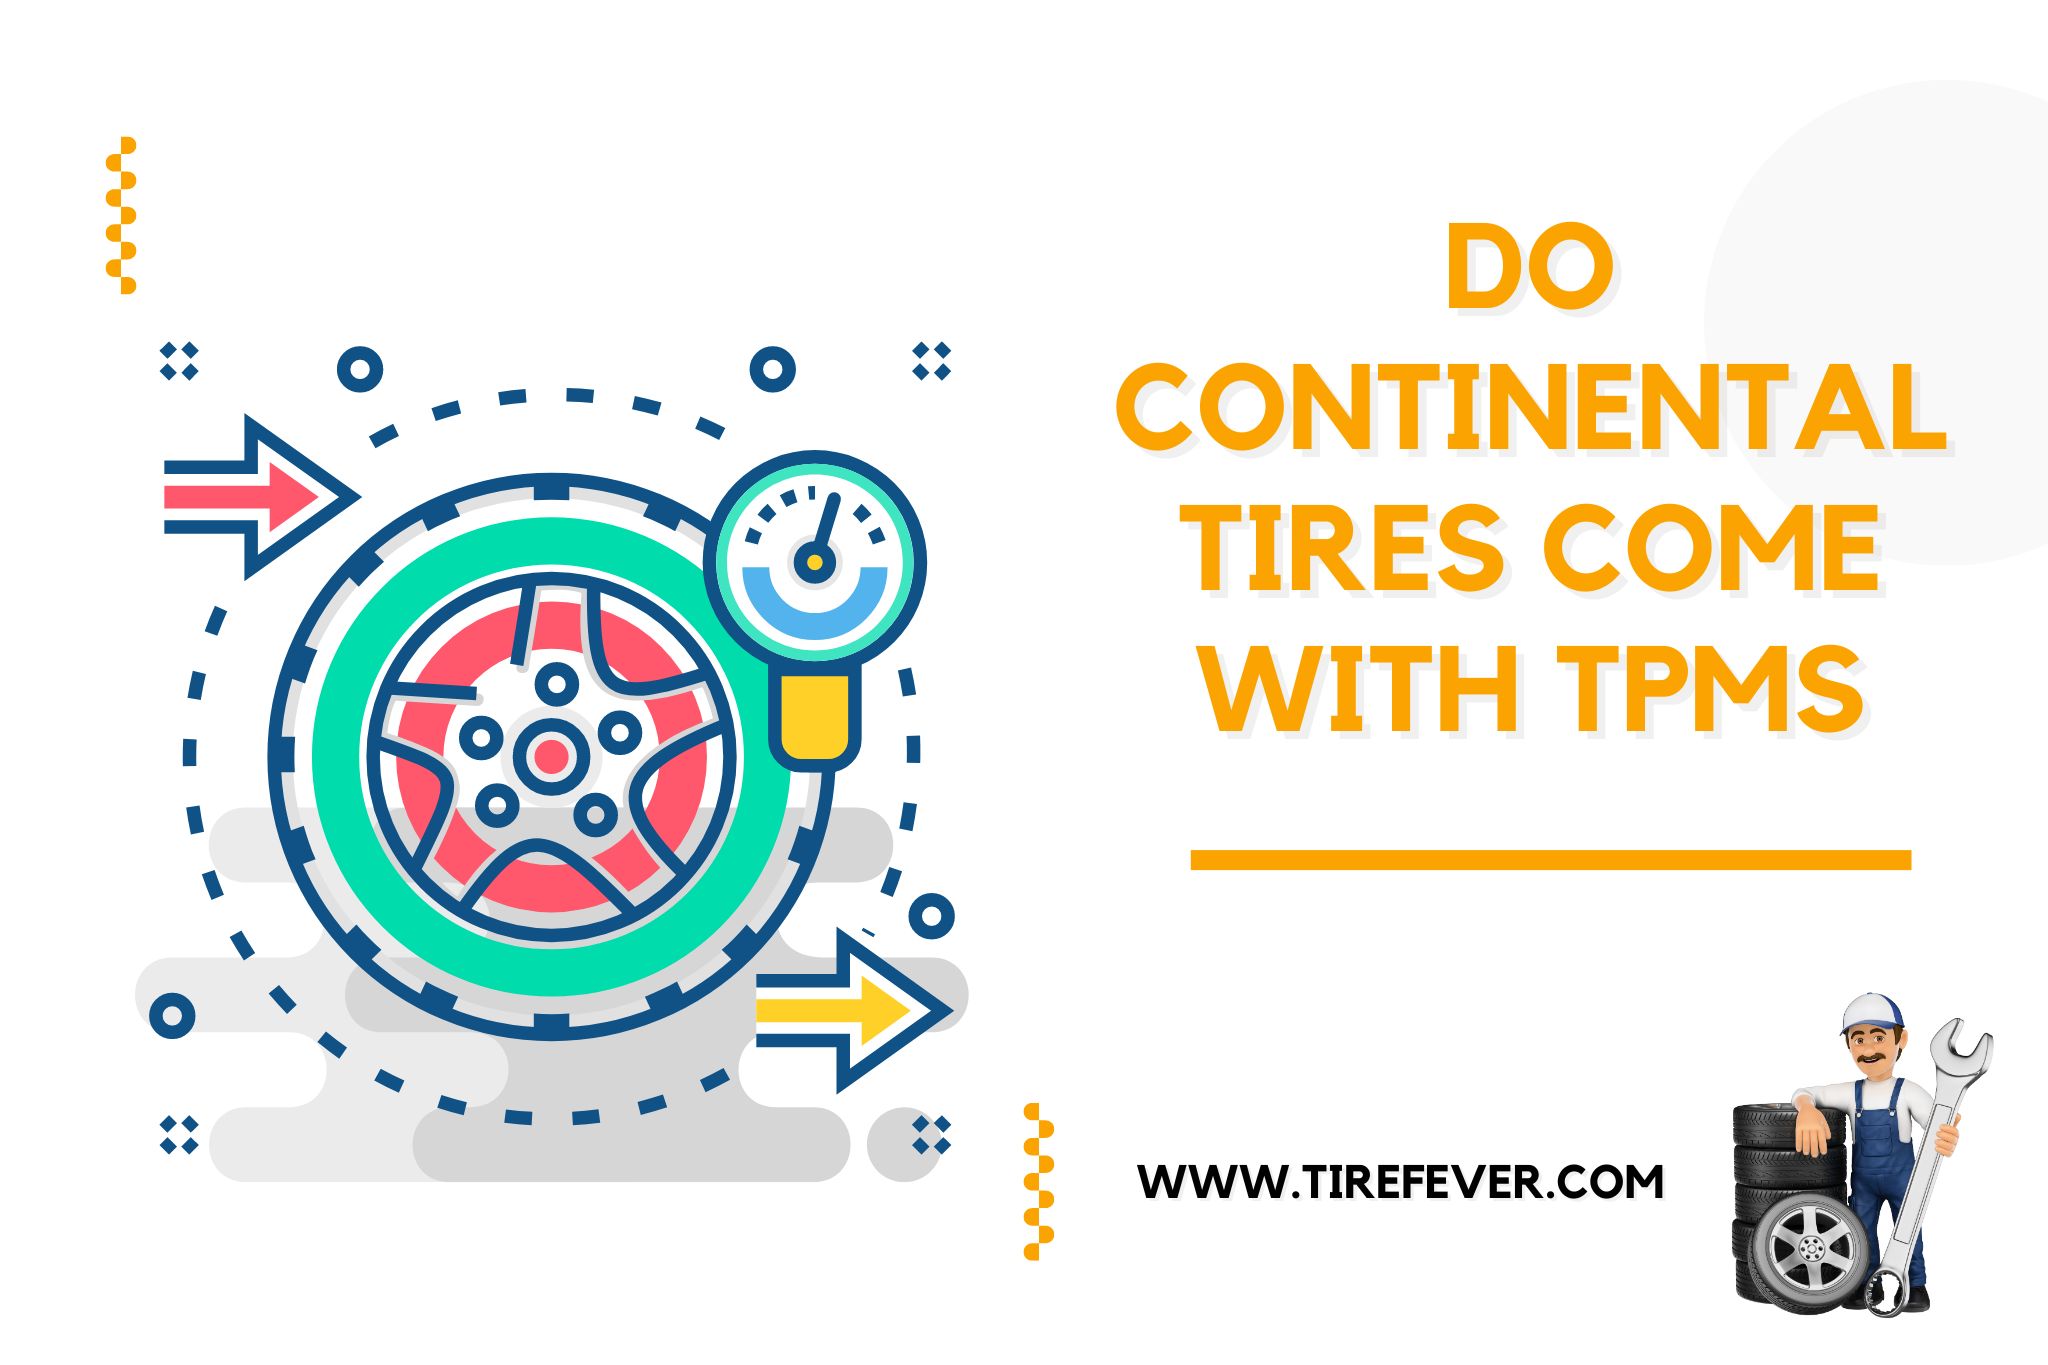 Do Continental Tires Come with TPMS